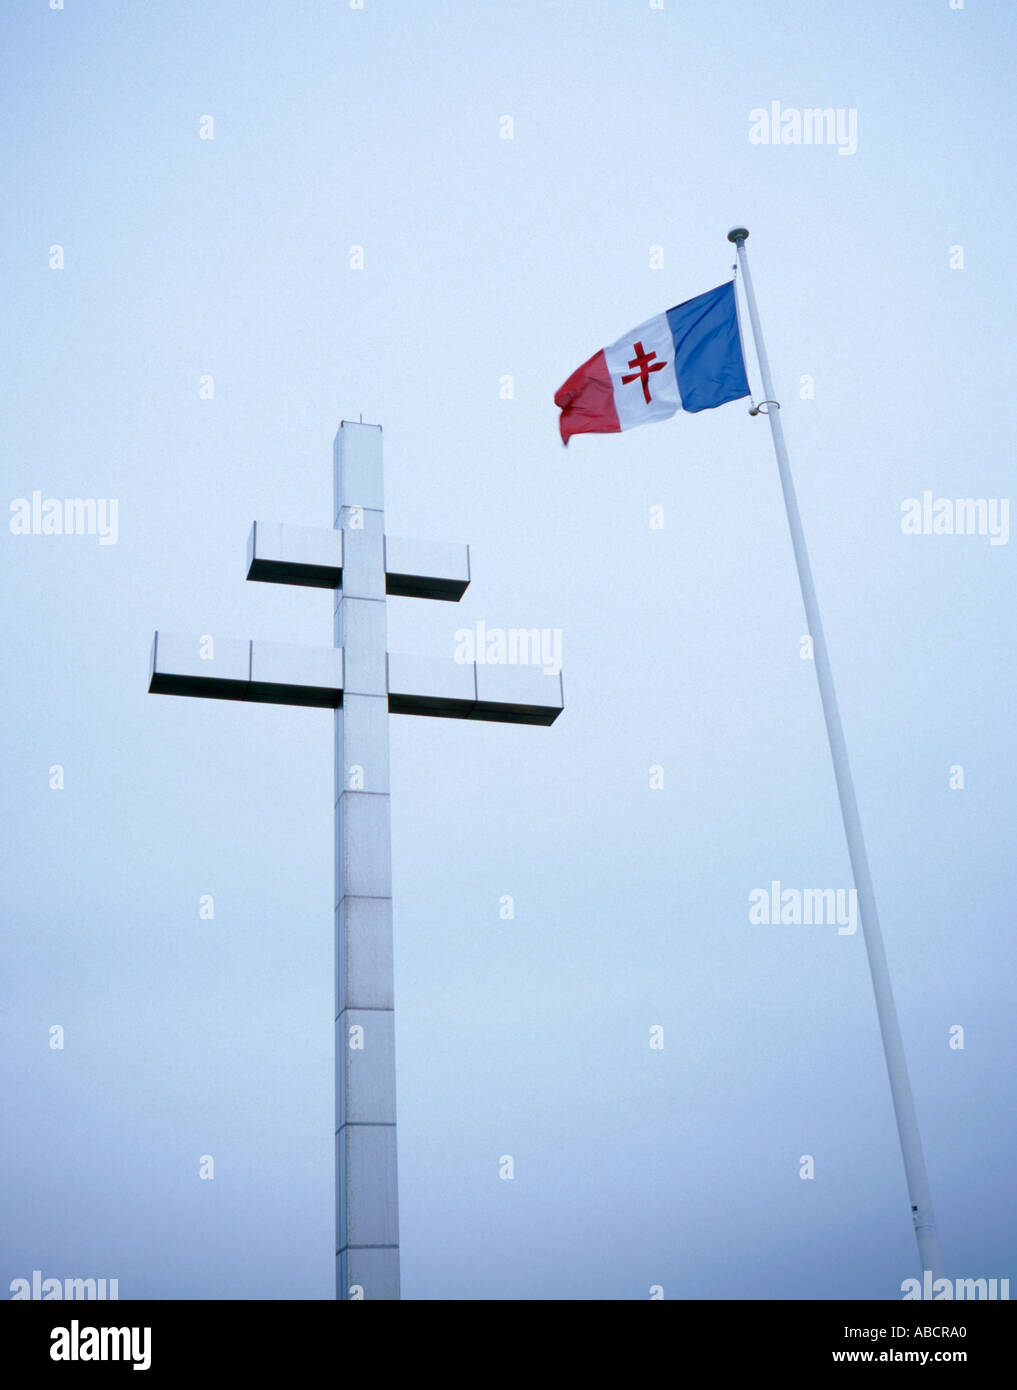 https://c8.alamy.com/comp/ABCRA0/cross-of-lorraine-and-french-flag-on-the-beach-at-bernires-sur-mer-ABCRA0.jpg